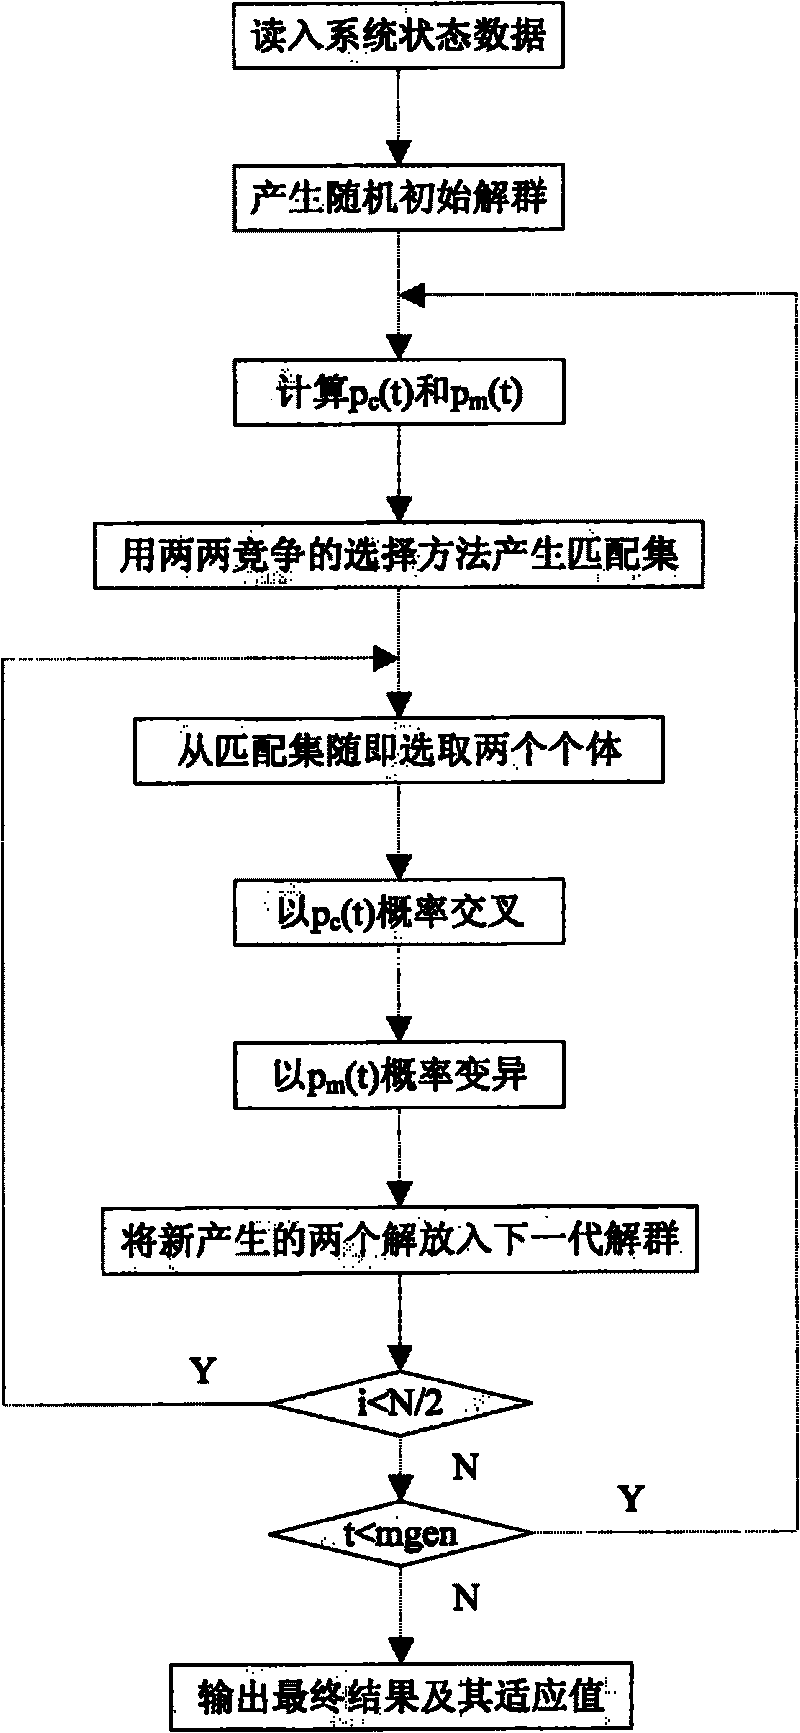 Immunity genetic algorithm and DSP failure diagnostic system based thereon